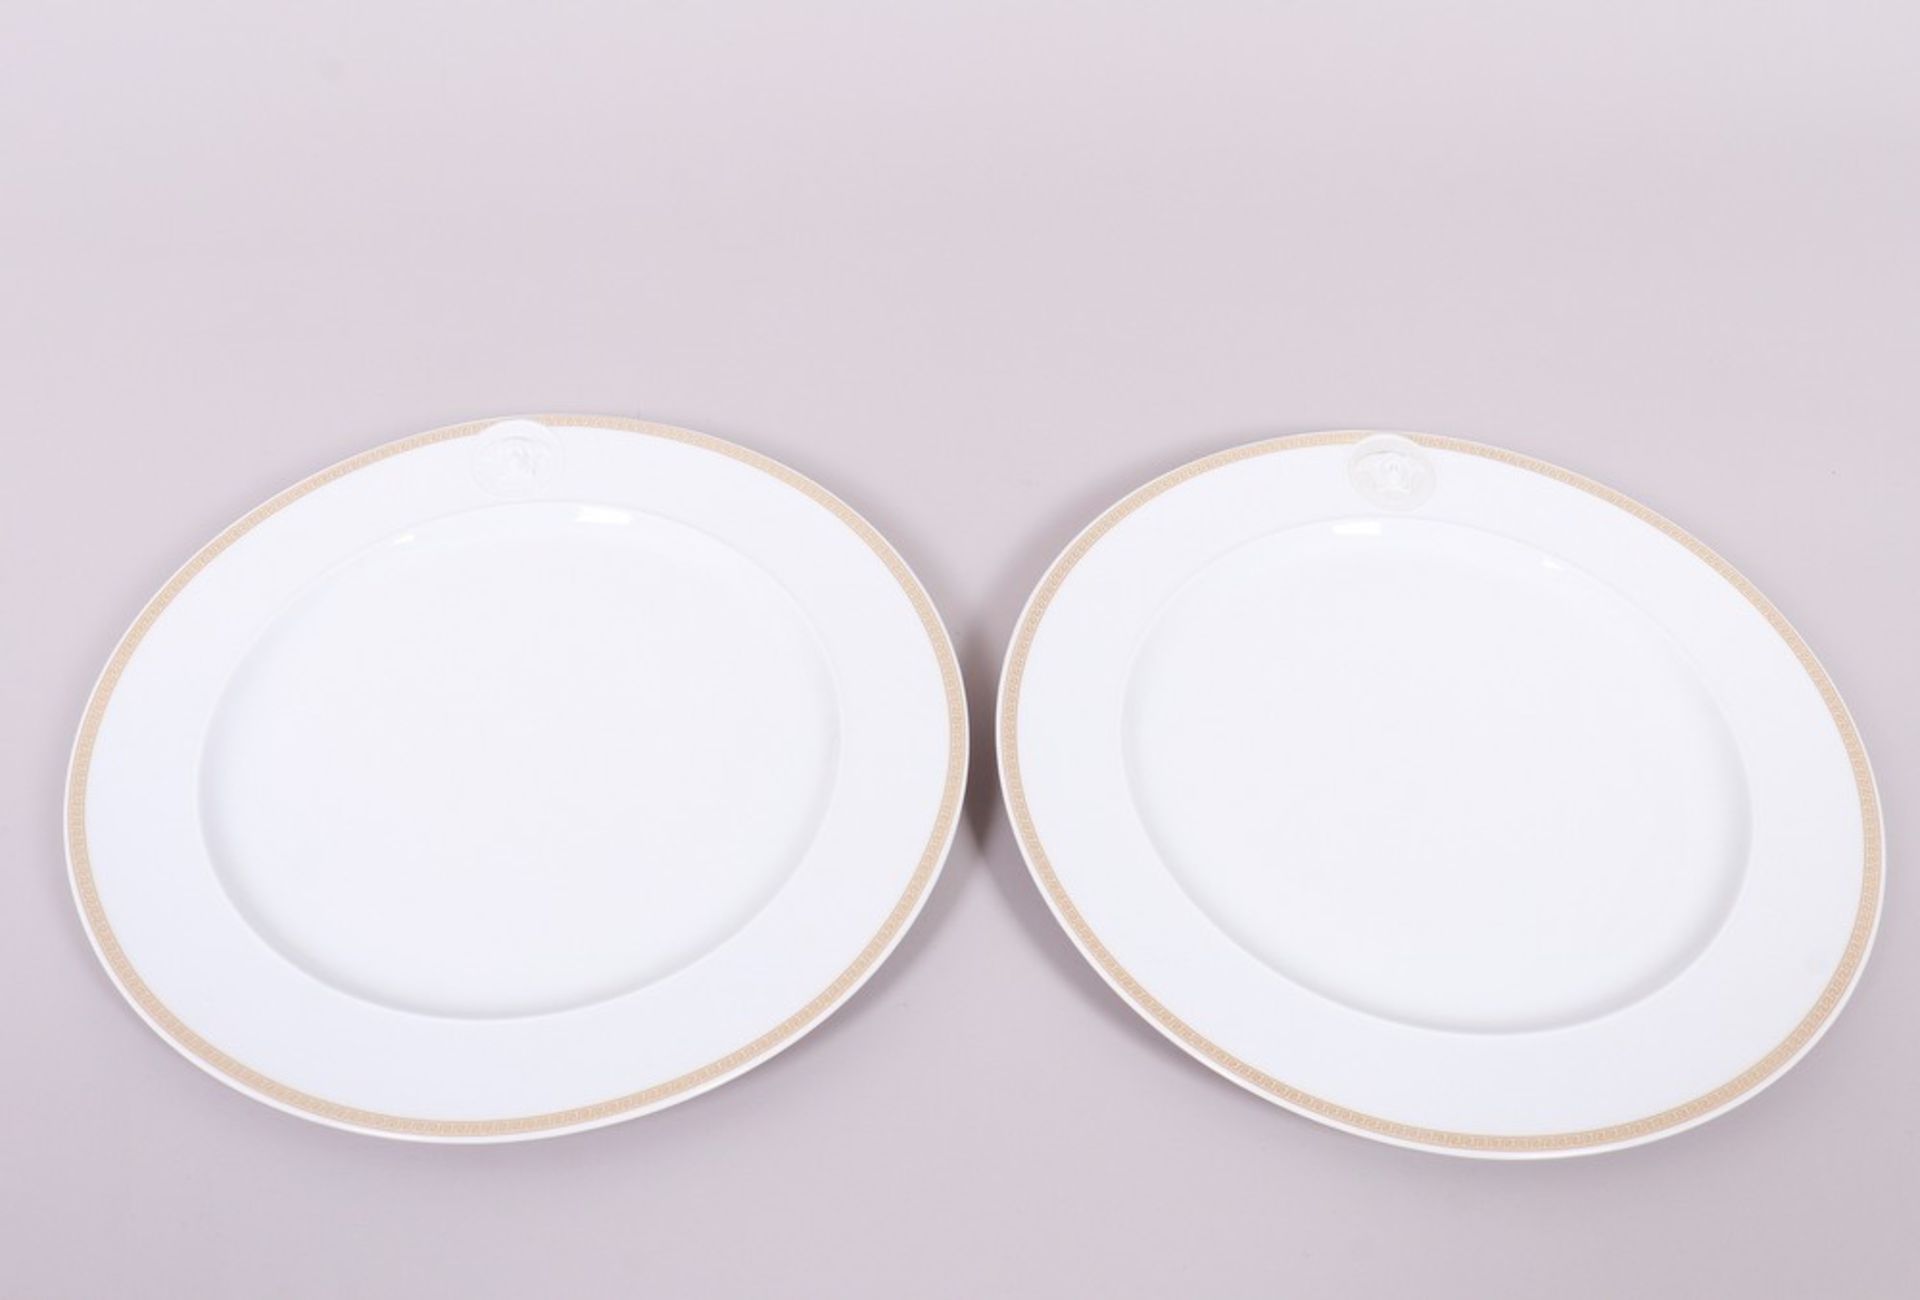 Six charger plates, “Icarus”, design Paul Wunderlich/ “Gorgona” decor by Gianni Versace for Rosenth - Image 2 of 5